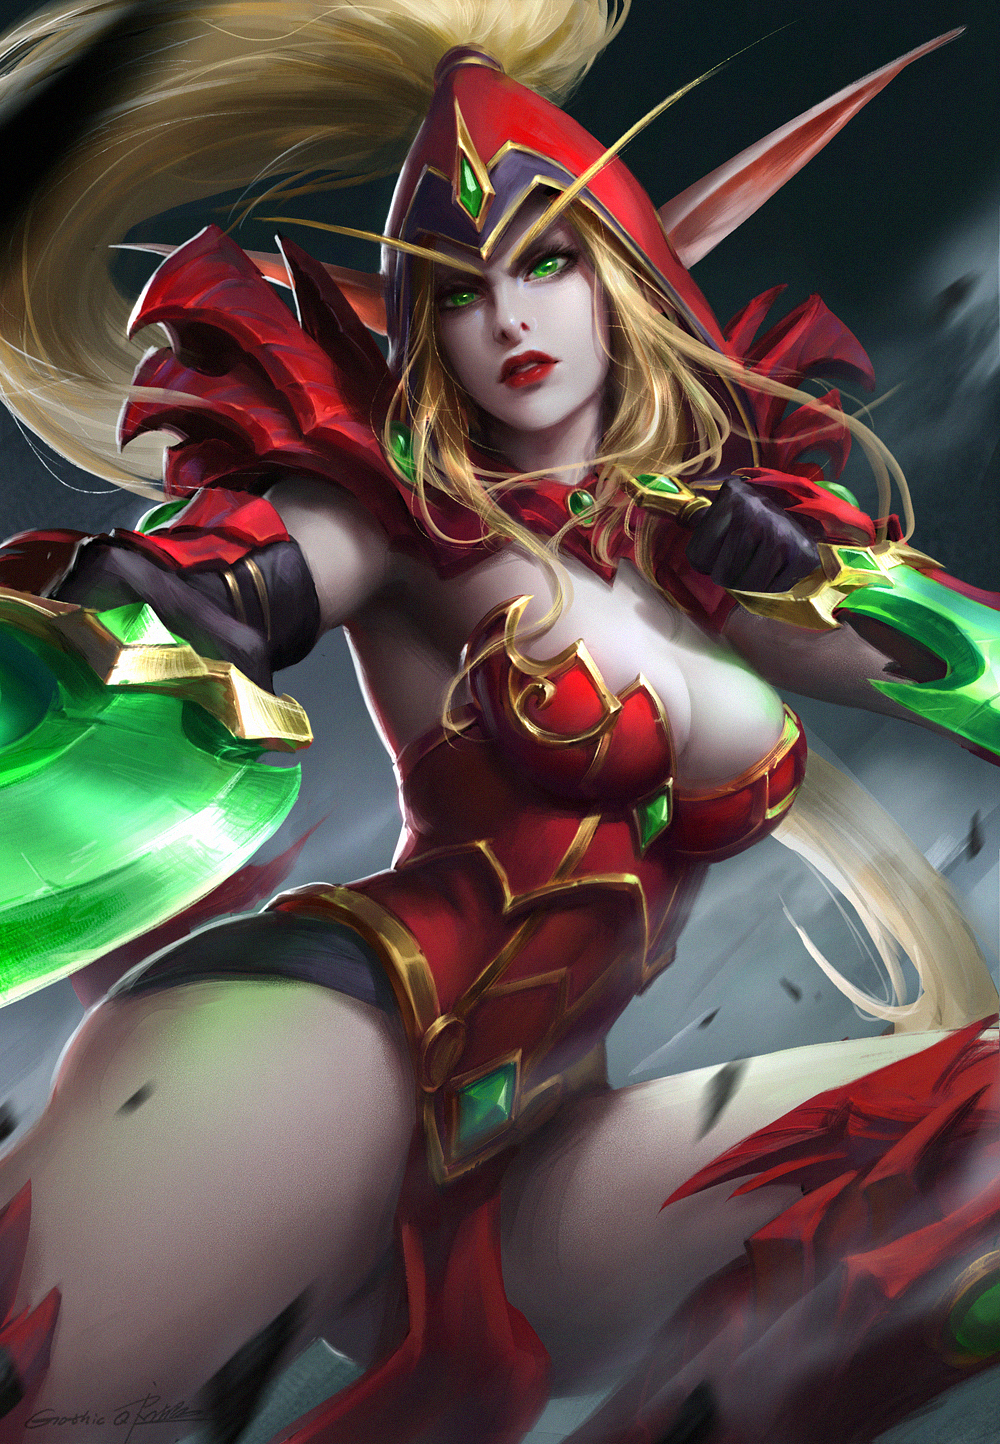 General 1000x1444 Warcraft tight clothing thighs video games big boobs cleavage Valeera ponytail World of Warcraft blood elves dagger Hearthstone: Heroes of Warcraft digital art artwork pointy ears Valeera Sanguinar Heroes of the Storm portrait display elves armor